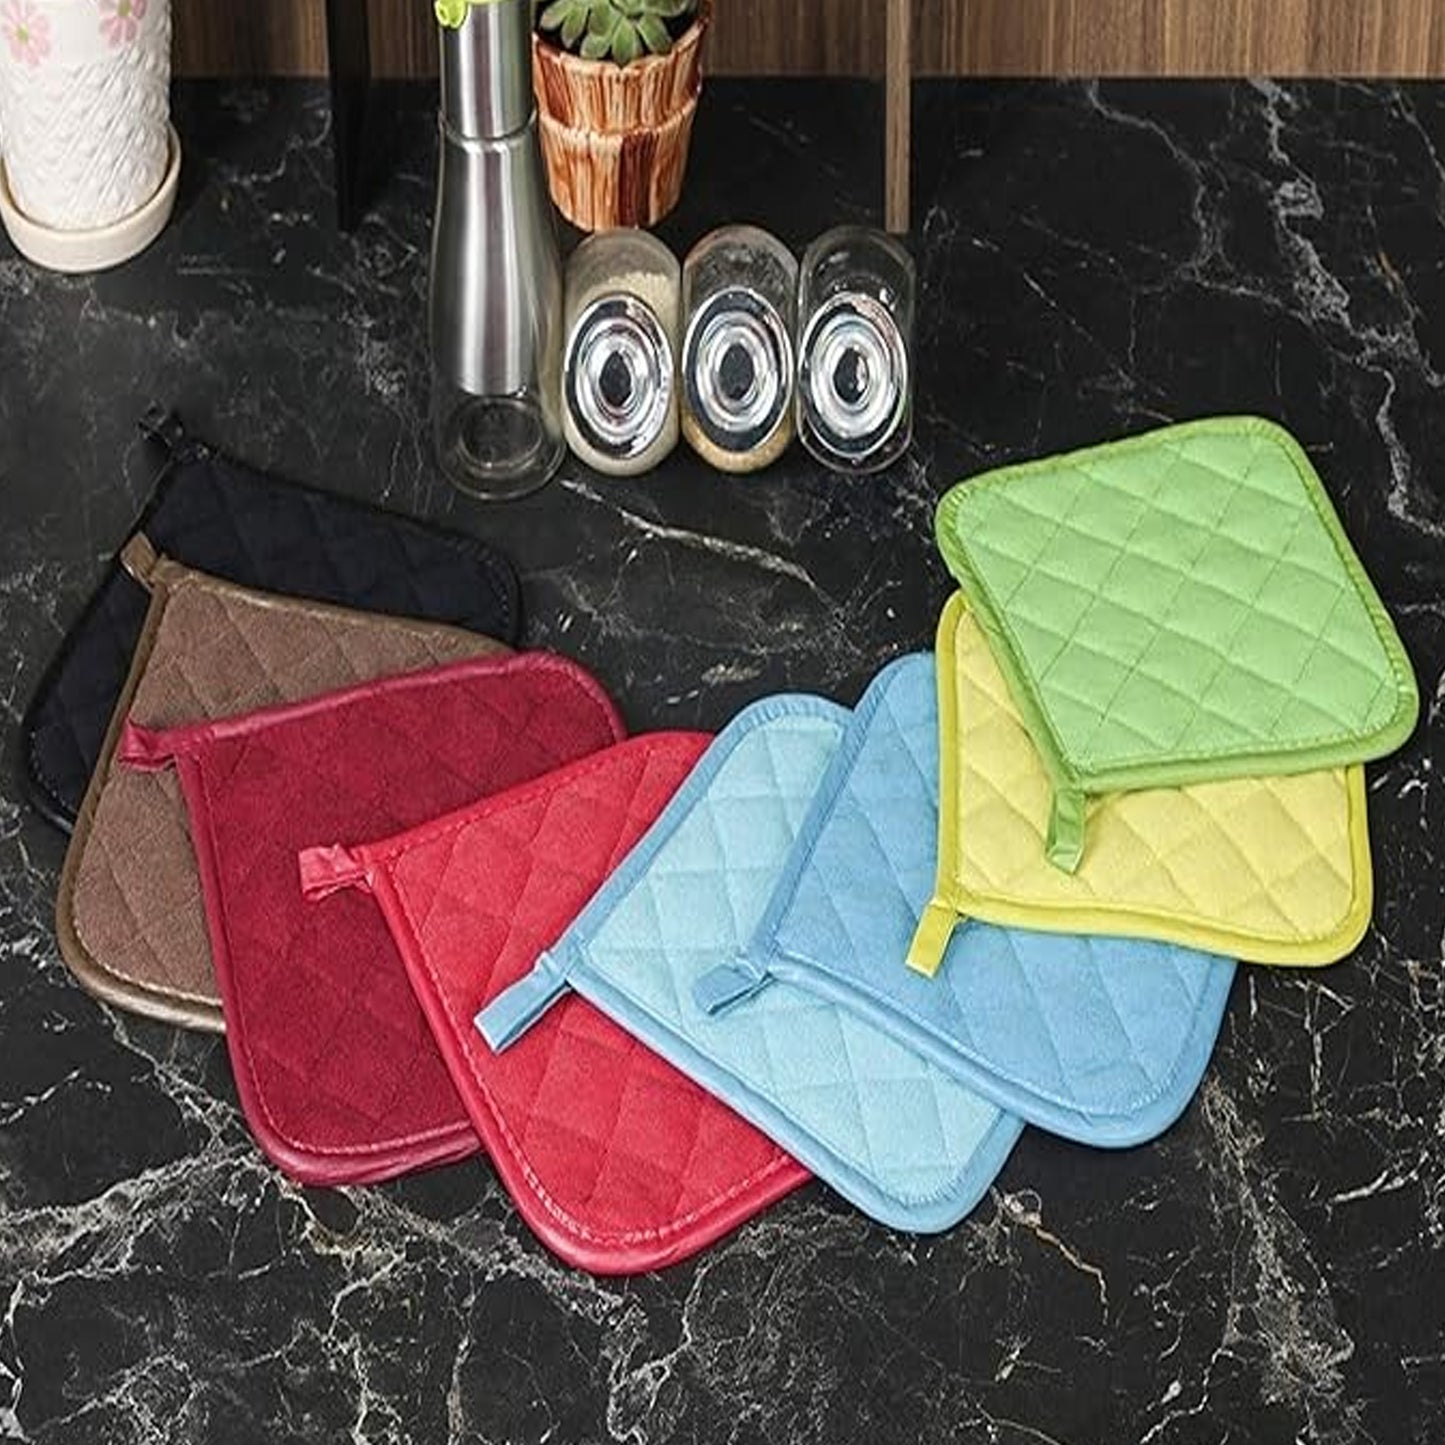 Pack Of 2 -Cute Printed Heat Resistant Kitchen fabric Pot Holder